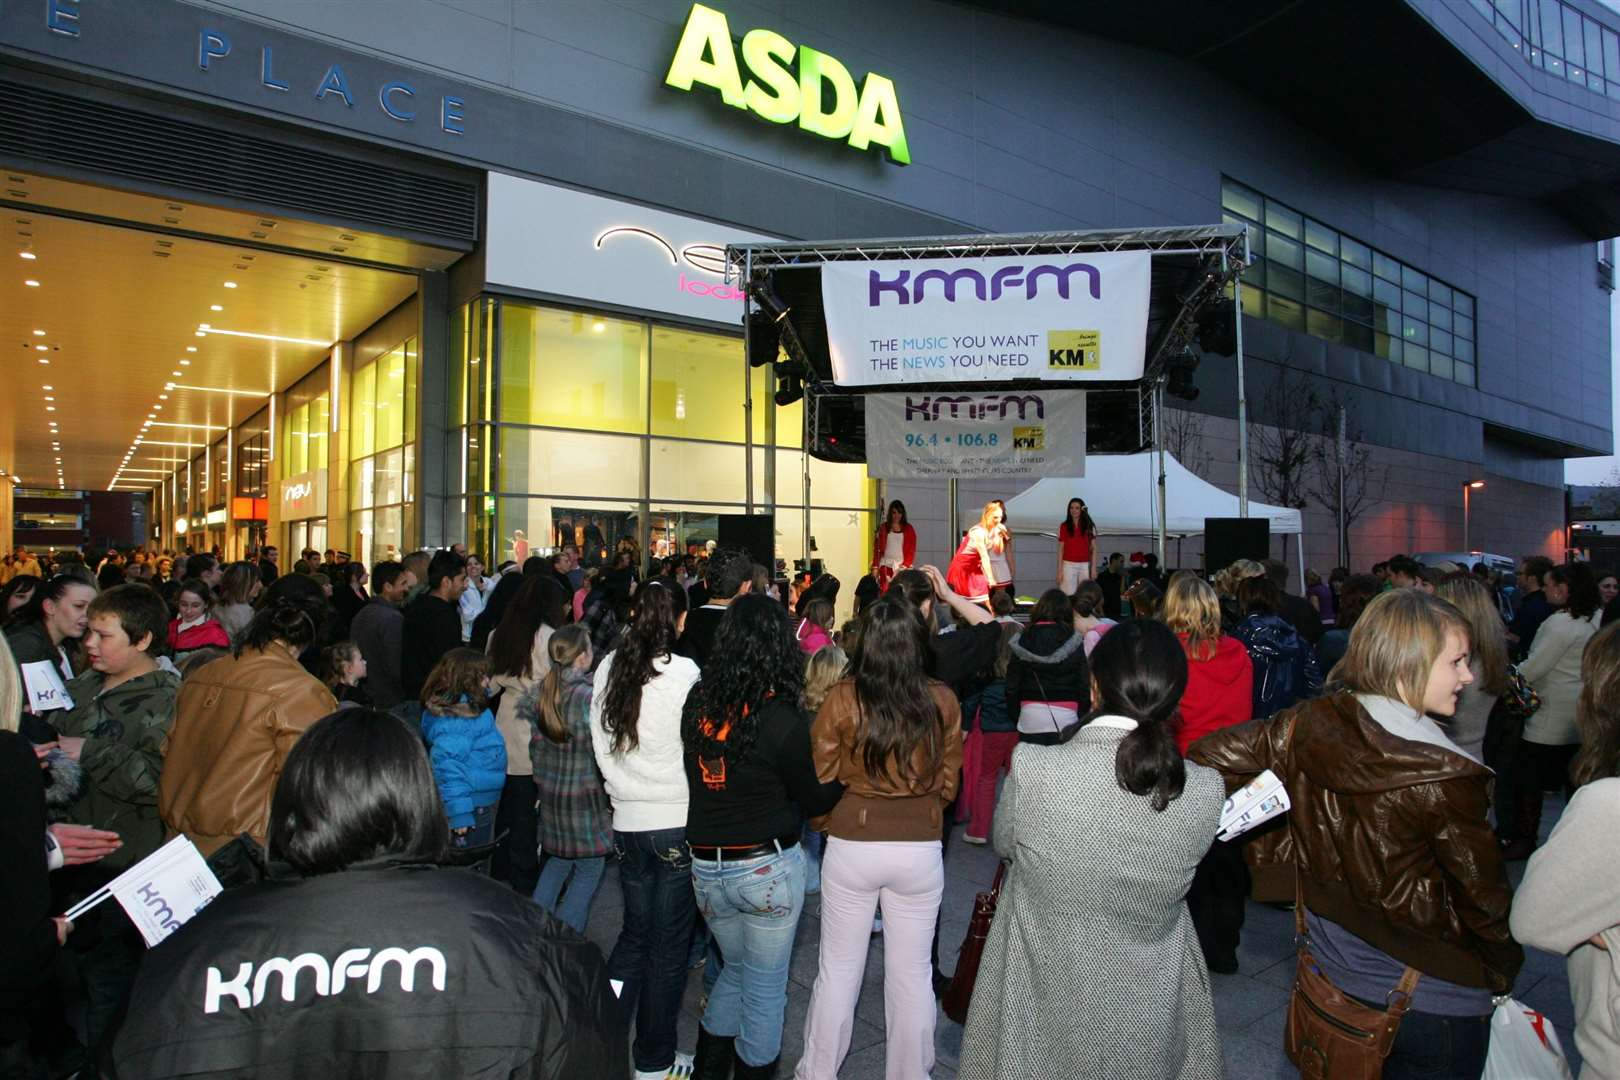 Bouverie Place Shopping Centre's Christmas entertainment and show 2009. There was dancers on stage, kmfm Adam Dowling, plus De-Tour from X Factor appeared